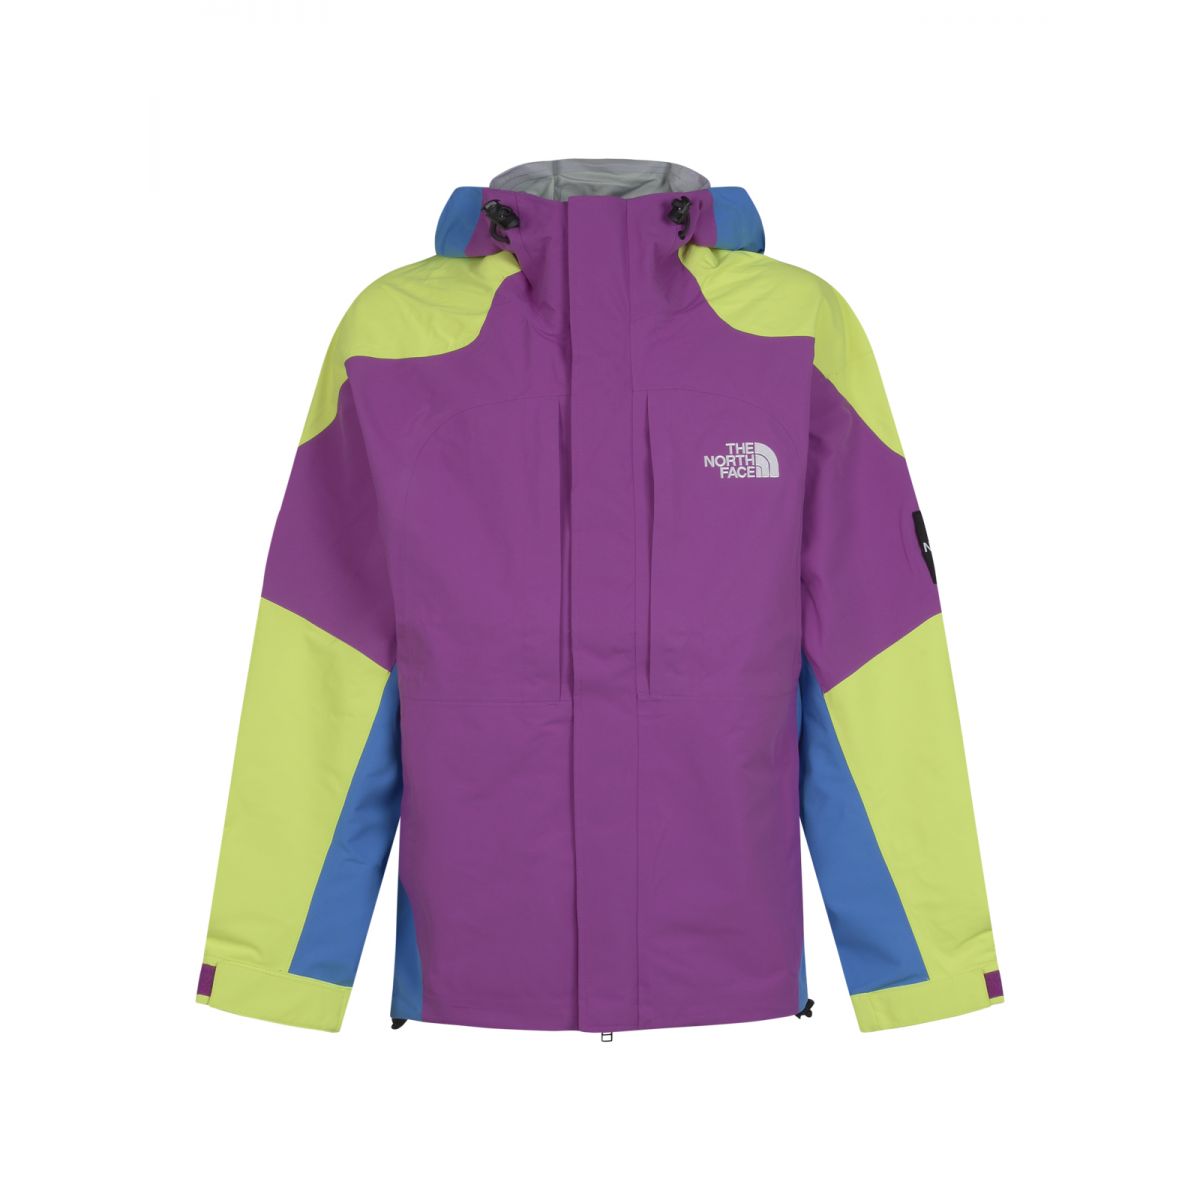 THE NORTH FACE - 3L DryVent™ hooded jacket